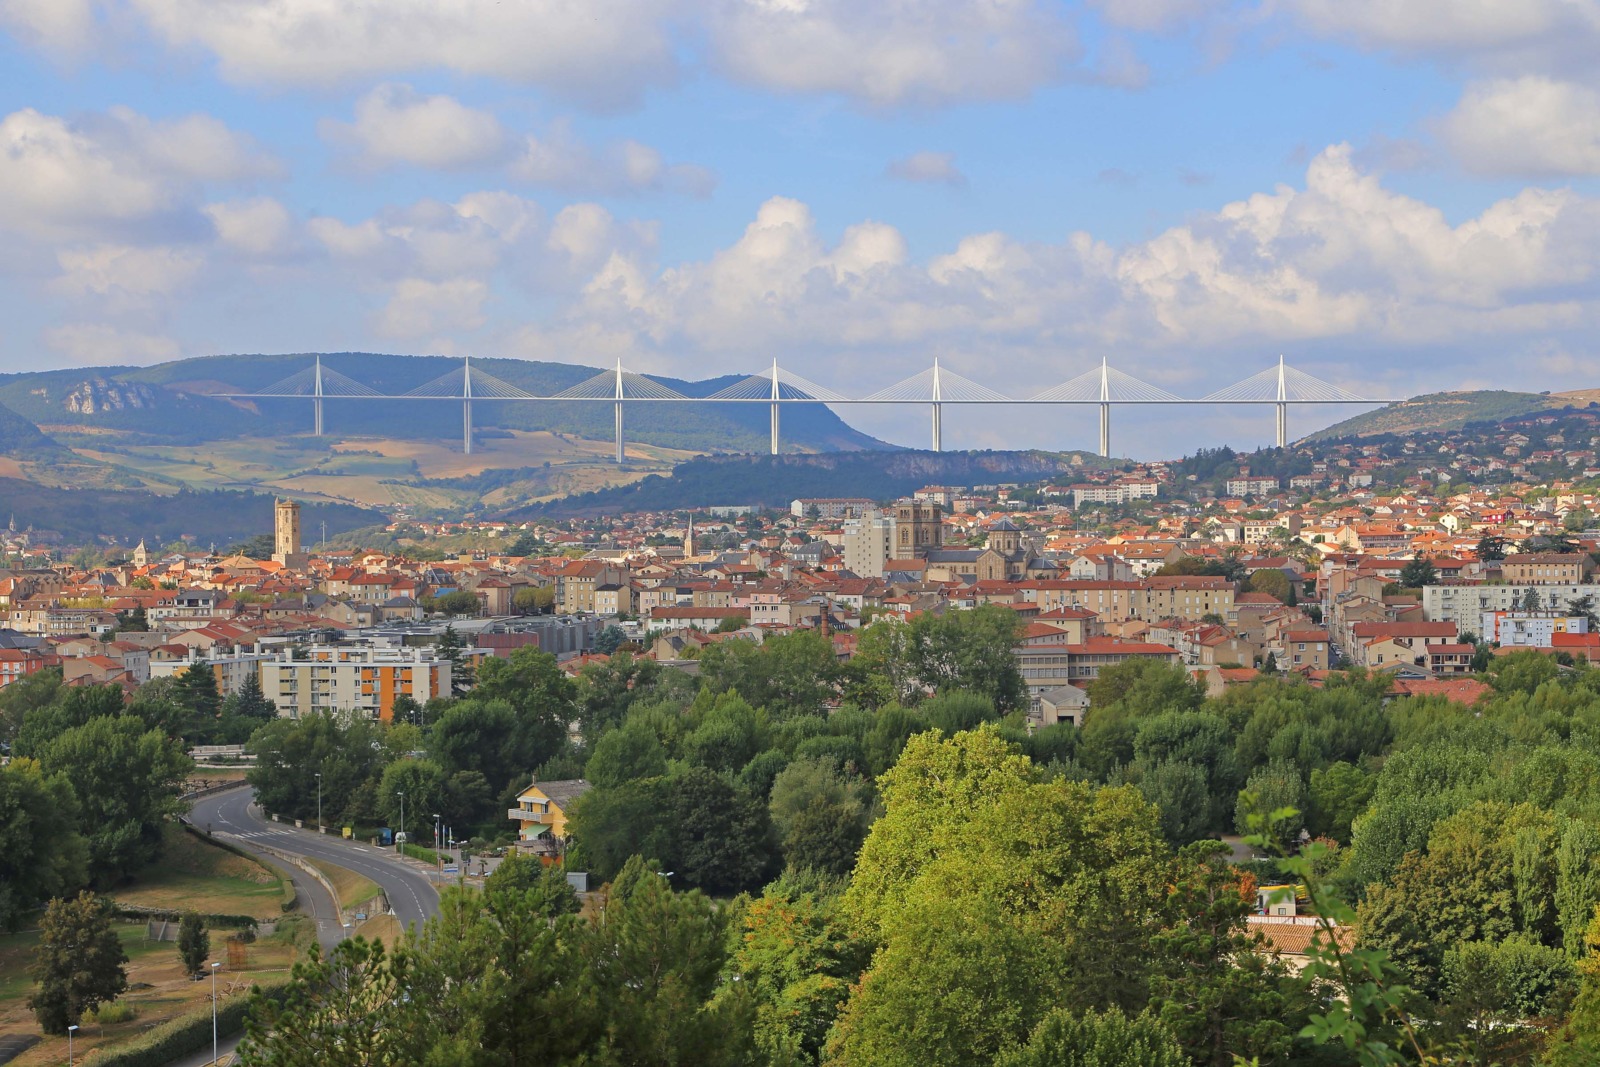 Millau Viaduct © Tobi 87 - licence [CC BY-SA 3.0] from Wikimedia Commons